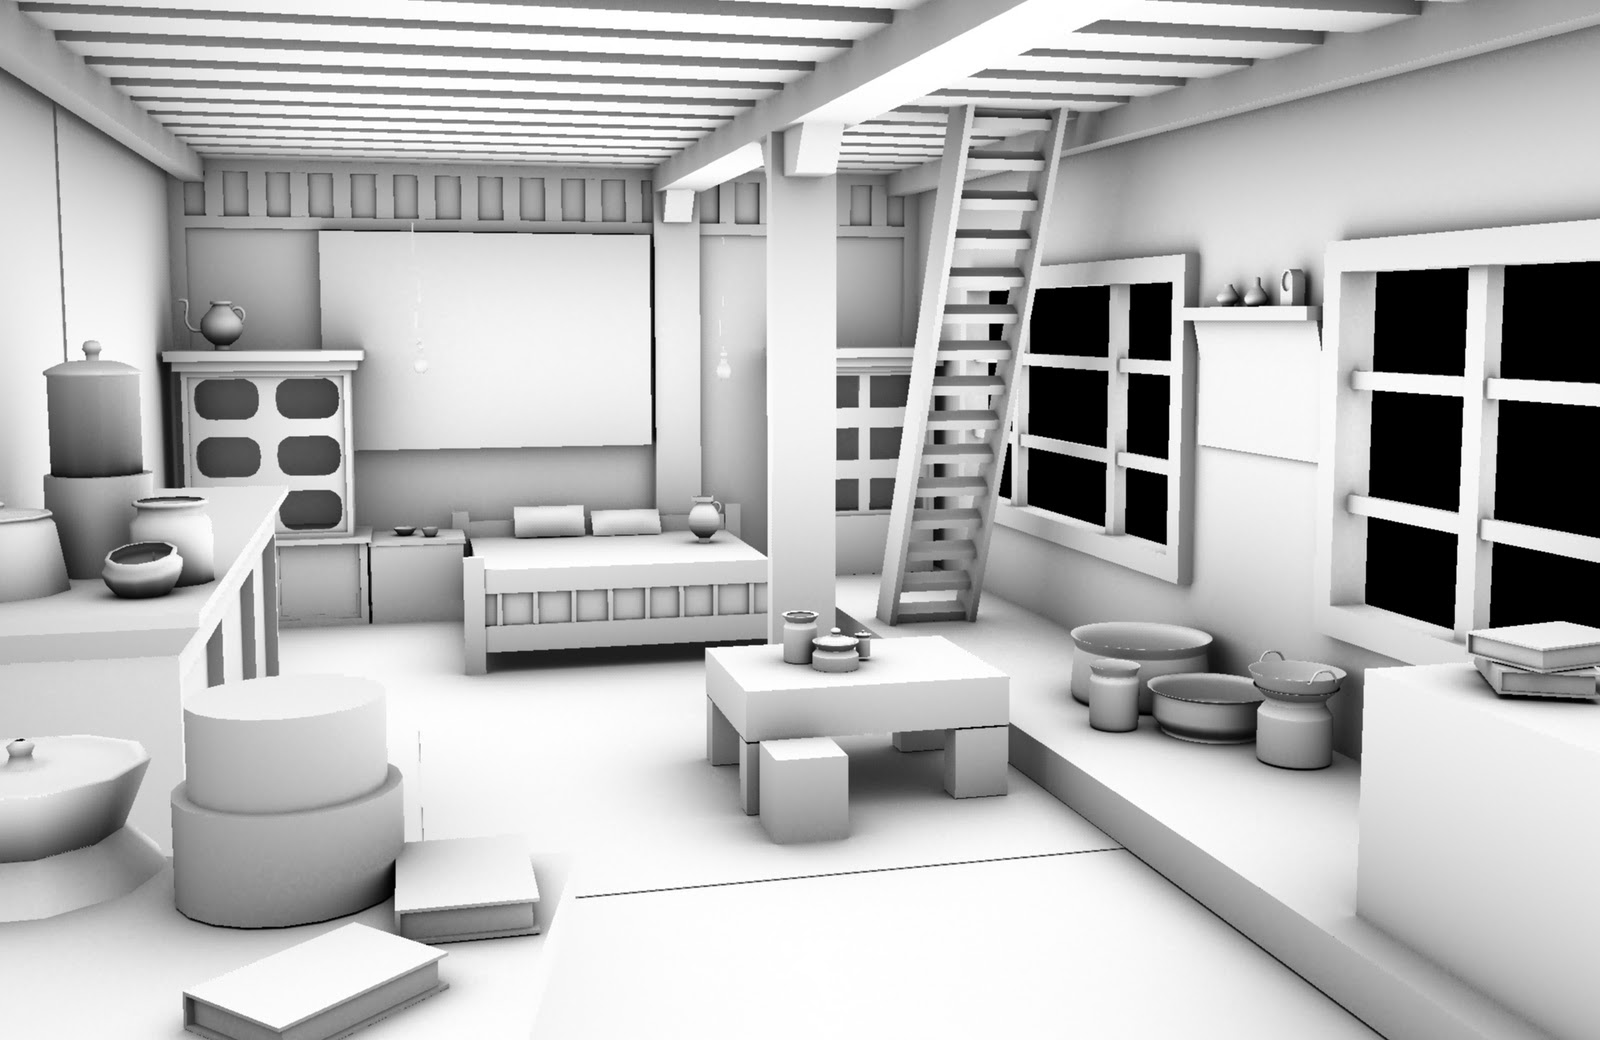 4. Advantages of Ambient Occlusion in 3D Graphics